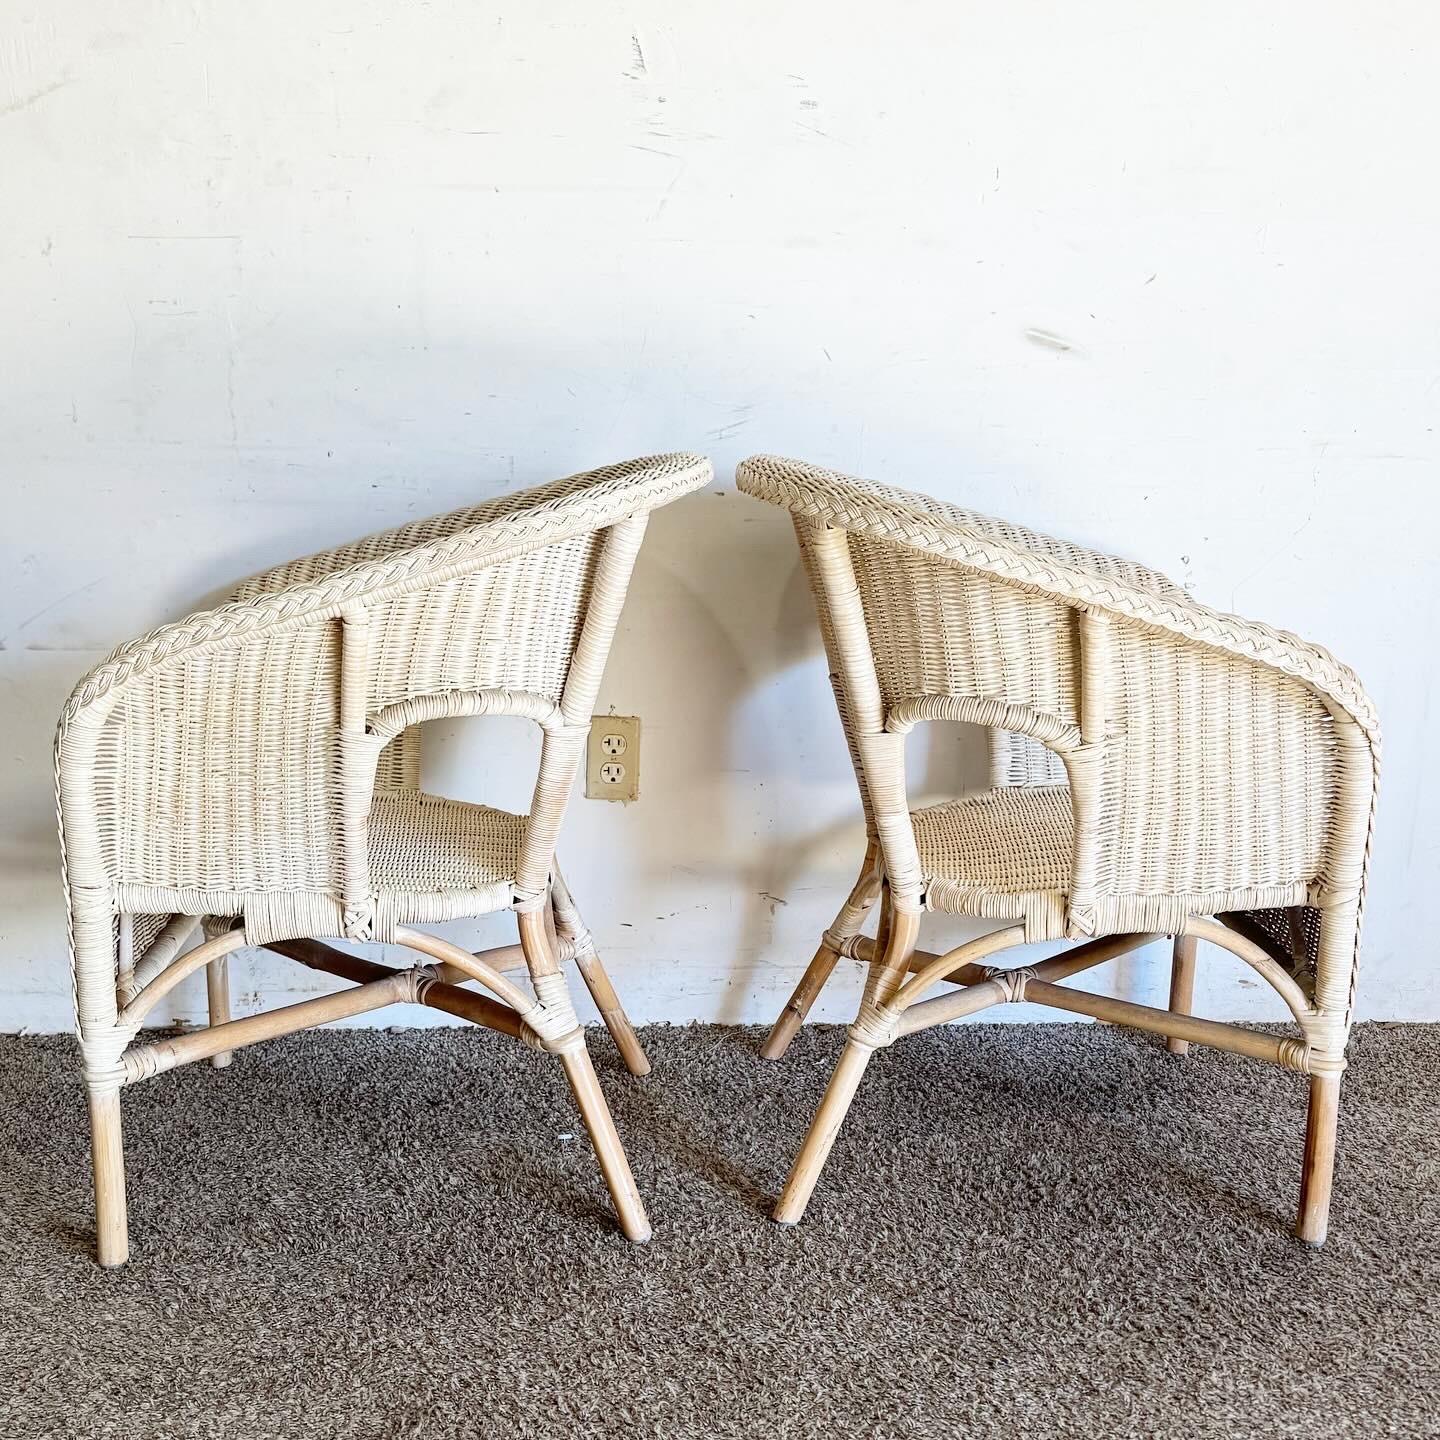 Late 20th Century Boho Chic White Washed Wicker and Rattan Lounge Chairs - a Pair For Sale